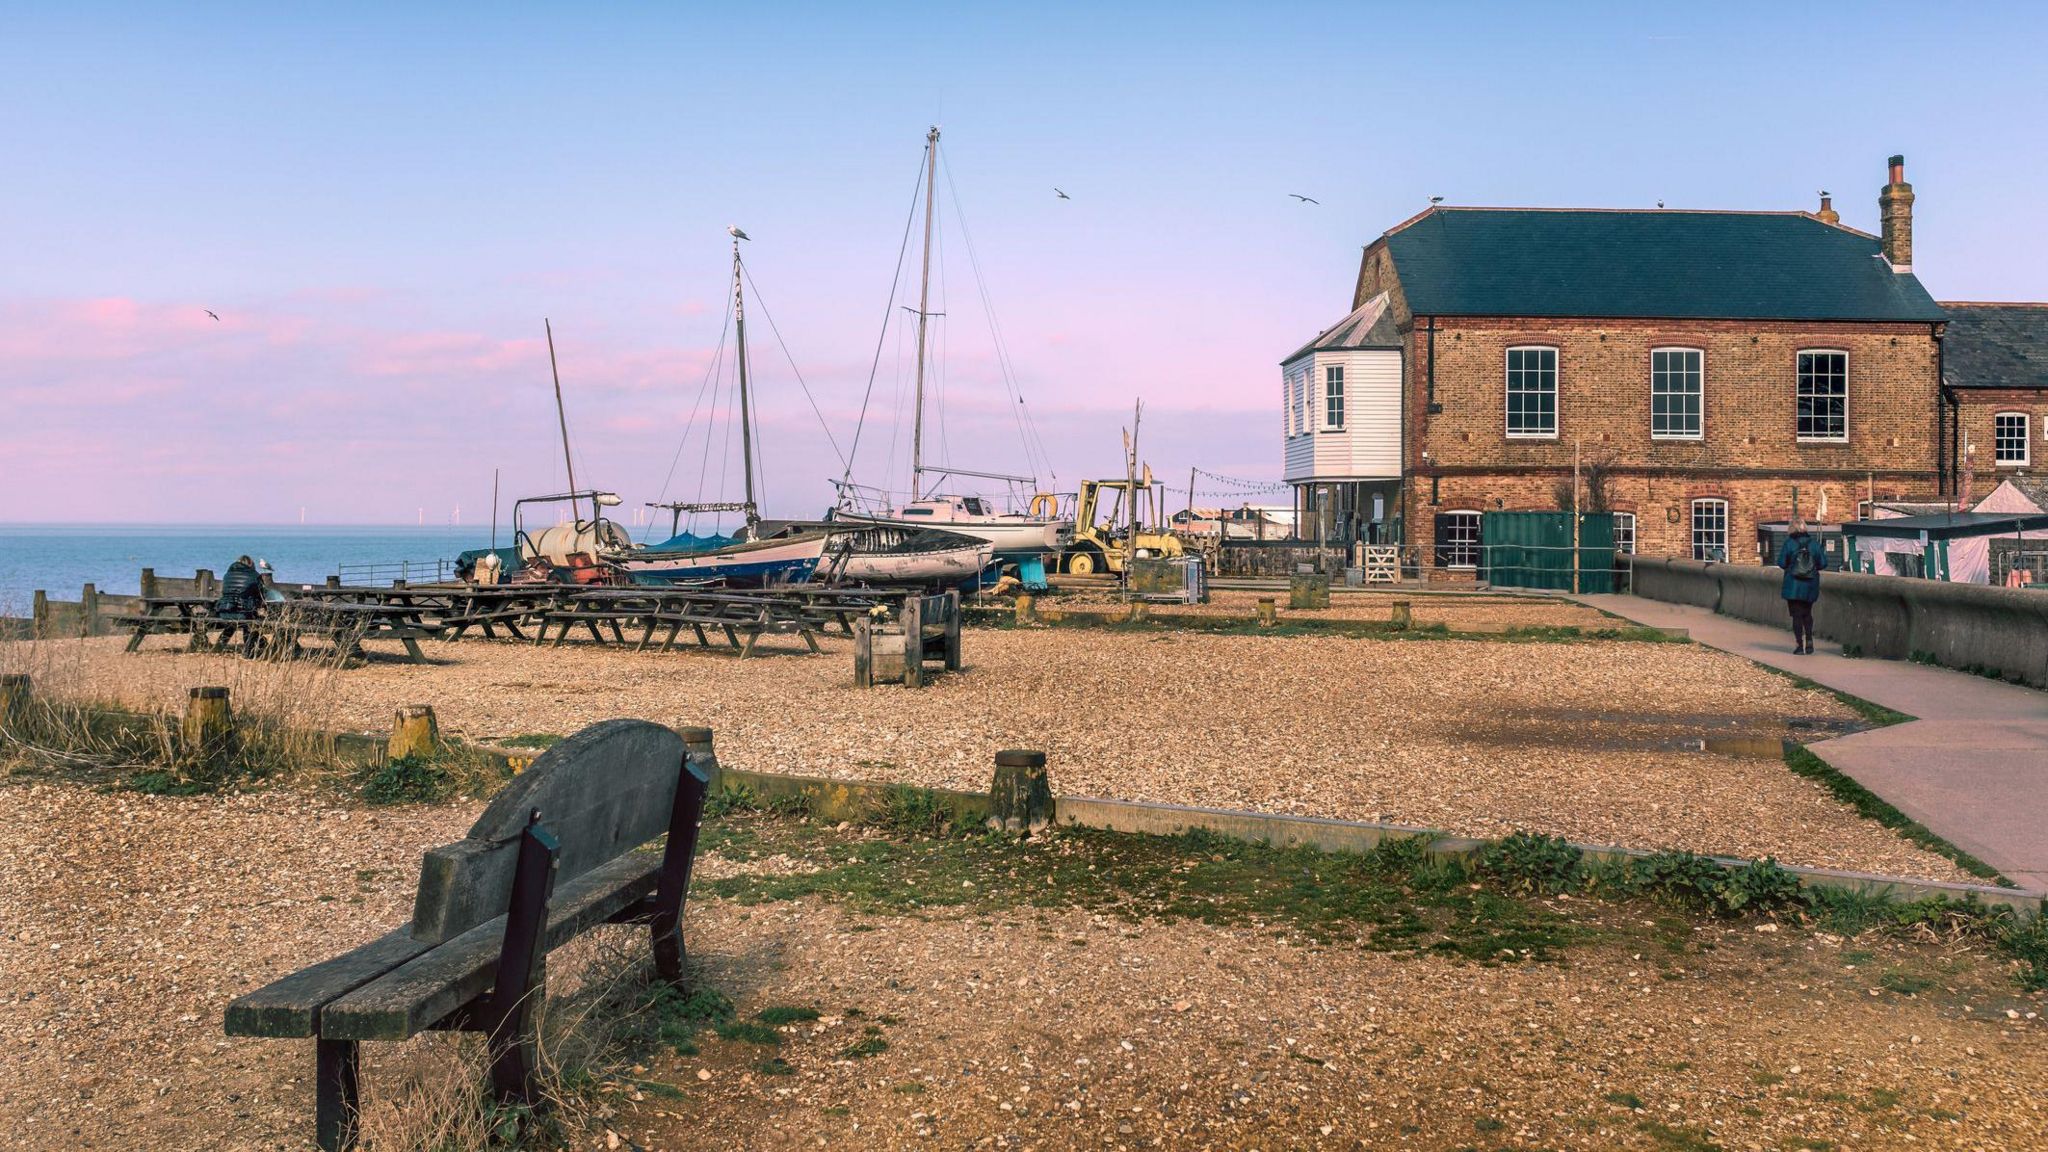 Boats pulled upo on a pebble beach behind some benches and tables on Whistable seafront